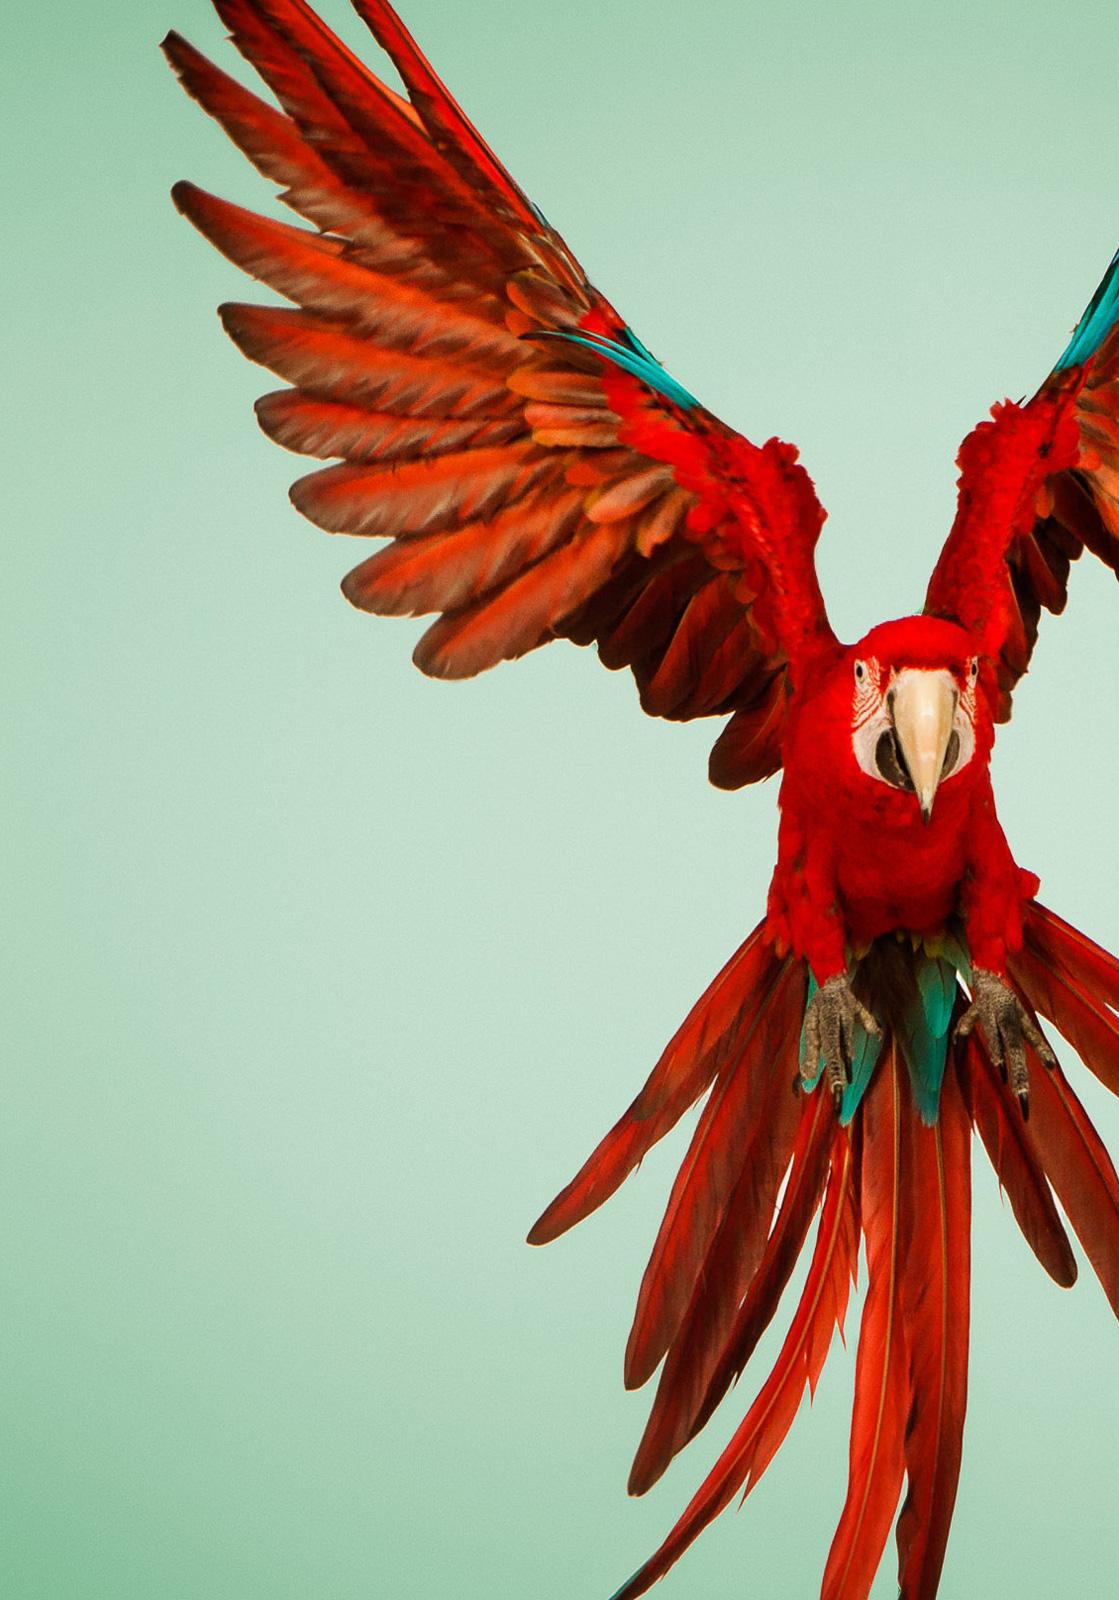  Macaw #6   -  Signed limited edition archival pigment print  -  Edition of 3

Green-Winged Macaw in flight. These large parrots can be mistaken for a Scarlet Macaw as their plumage is mainly red from the front. They are the second largest parrots